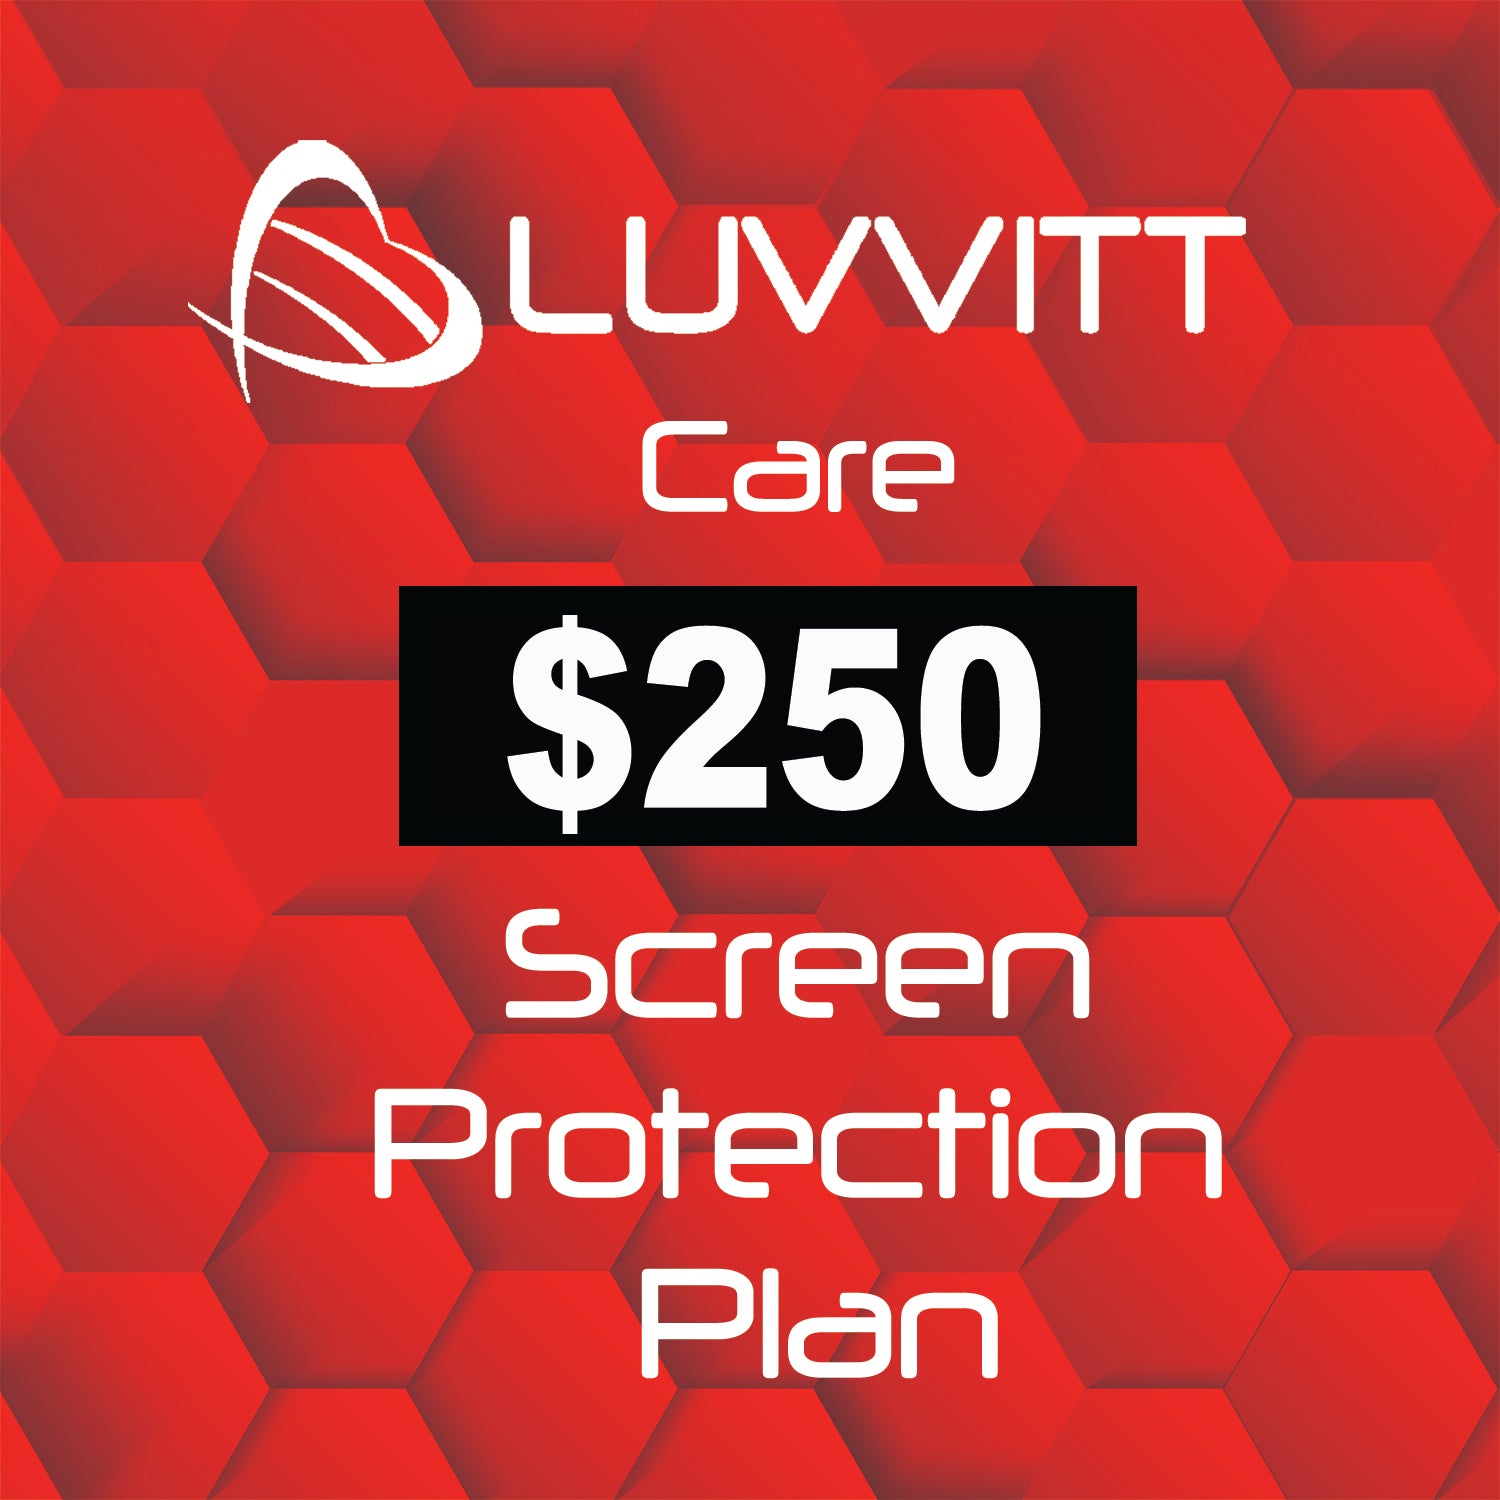 Luvvitt Care $250 Screen Protection Coverage for all Mobile Devices